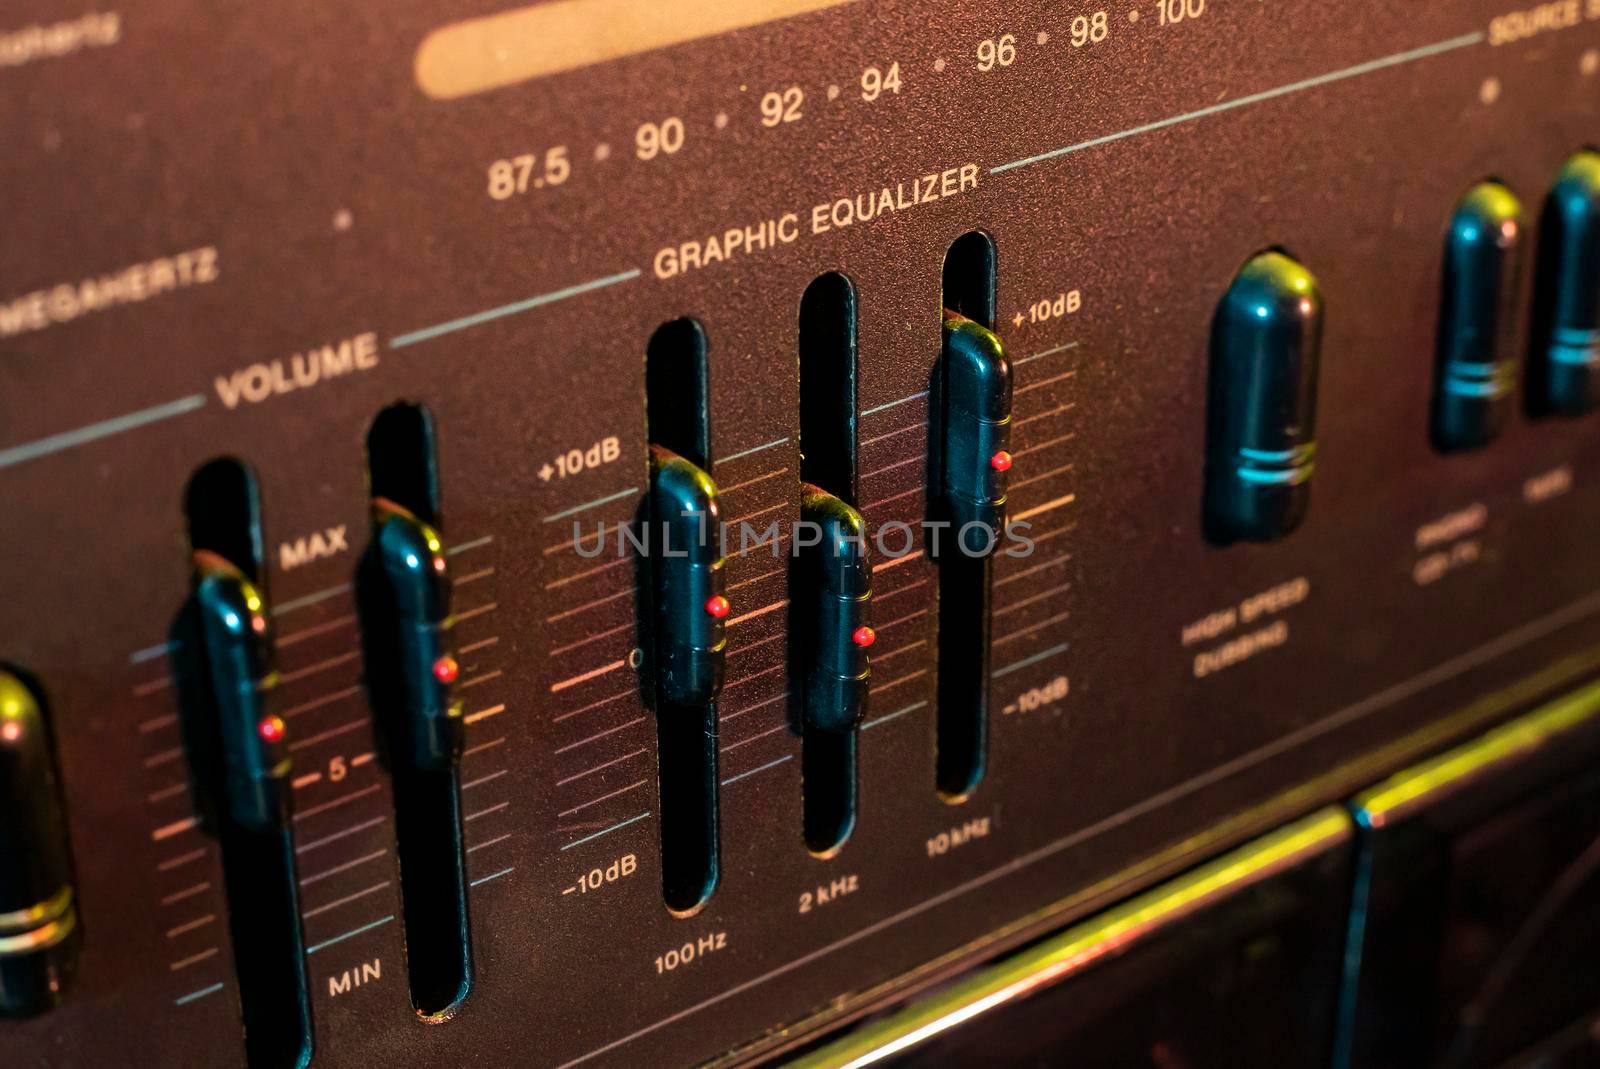 Volume and equalizer 5 by pippocarlot